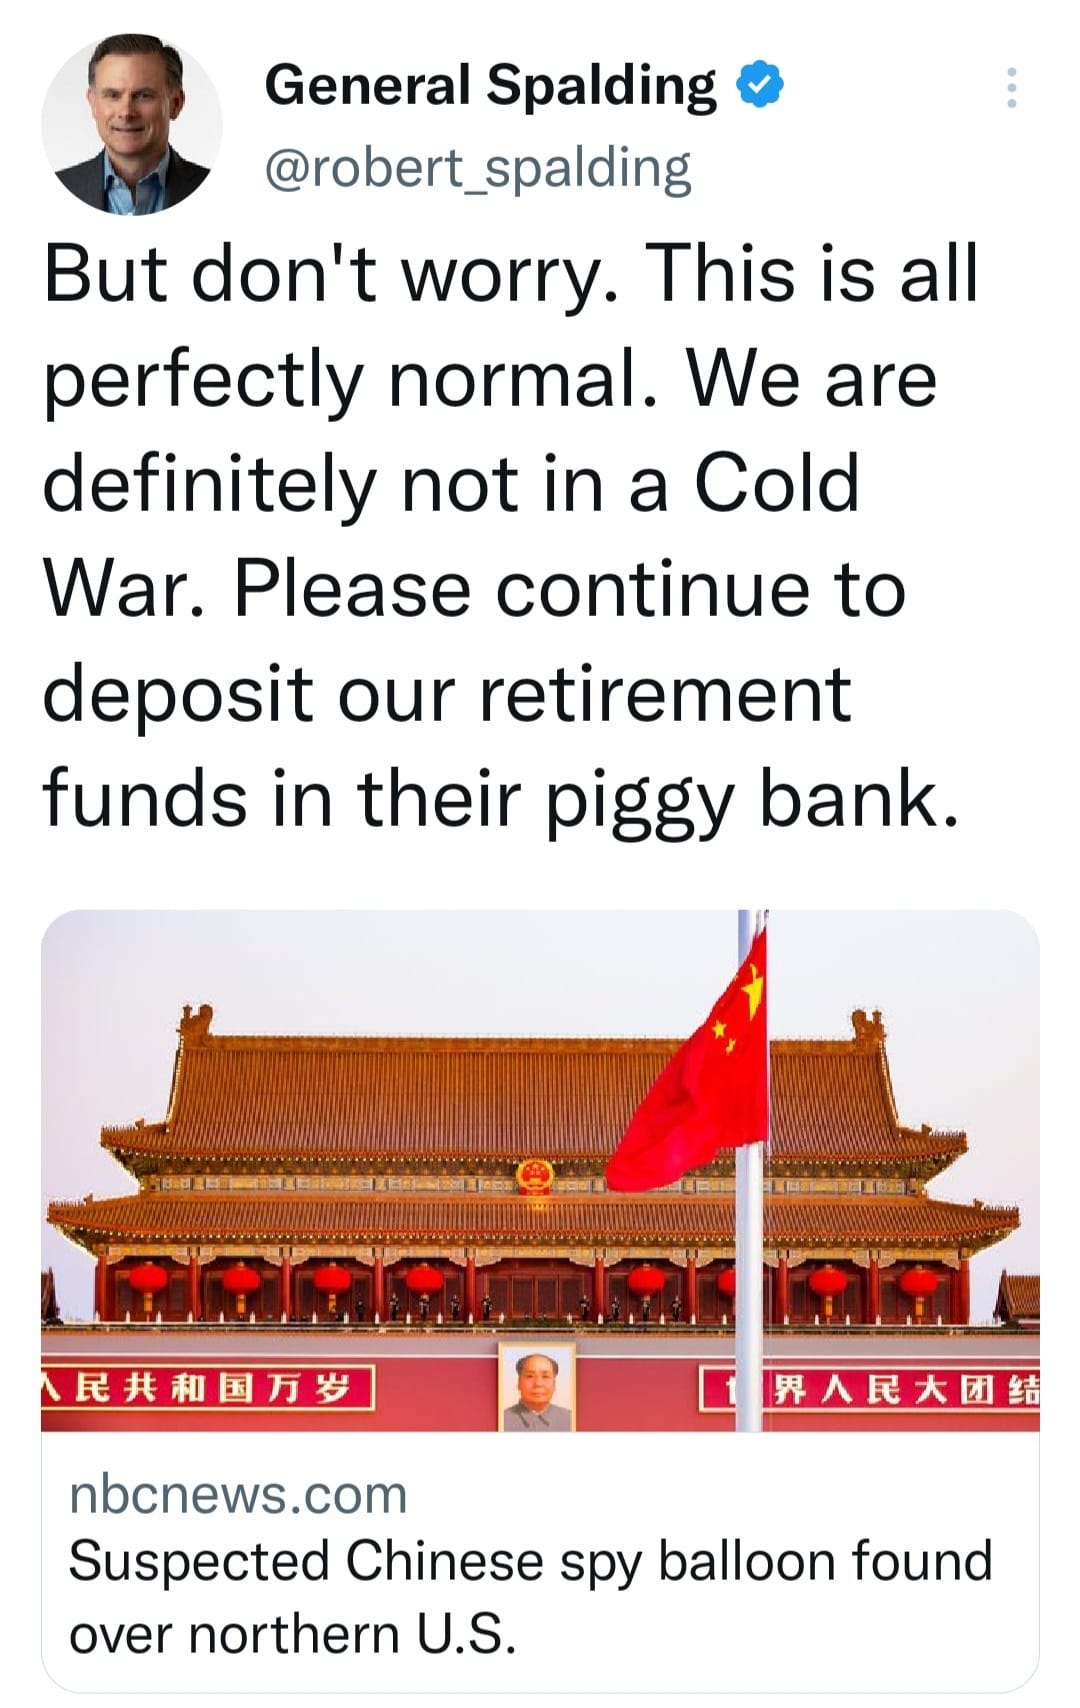 May be an image of 2 people and text that says 'General Spalding @robert_spalding But don't worry. This is all perfectly normal. We are definitely not in a Cold War Please continue to deposit our retirement funds in their piggy bank. æ‘共和国万岁 界人民‘大团结 nbcnews.com Suspected Chinese spy balloon found over northern U.S.'